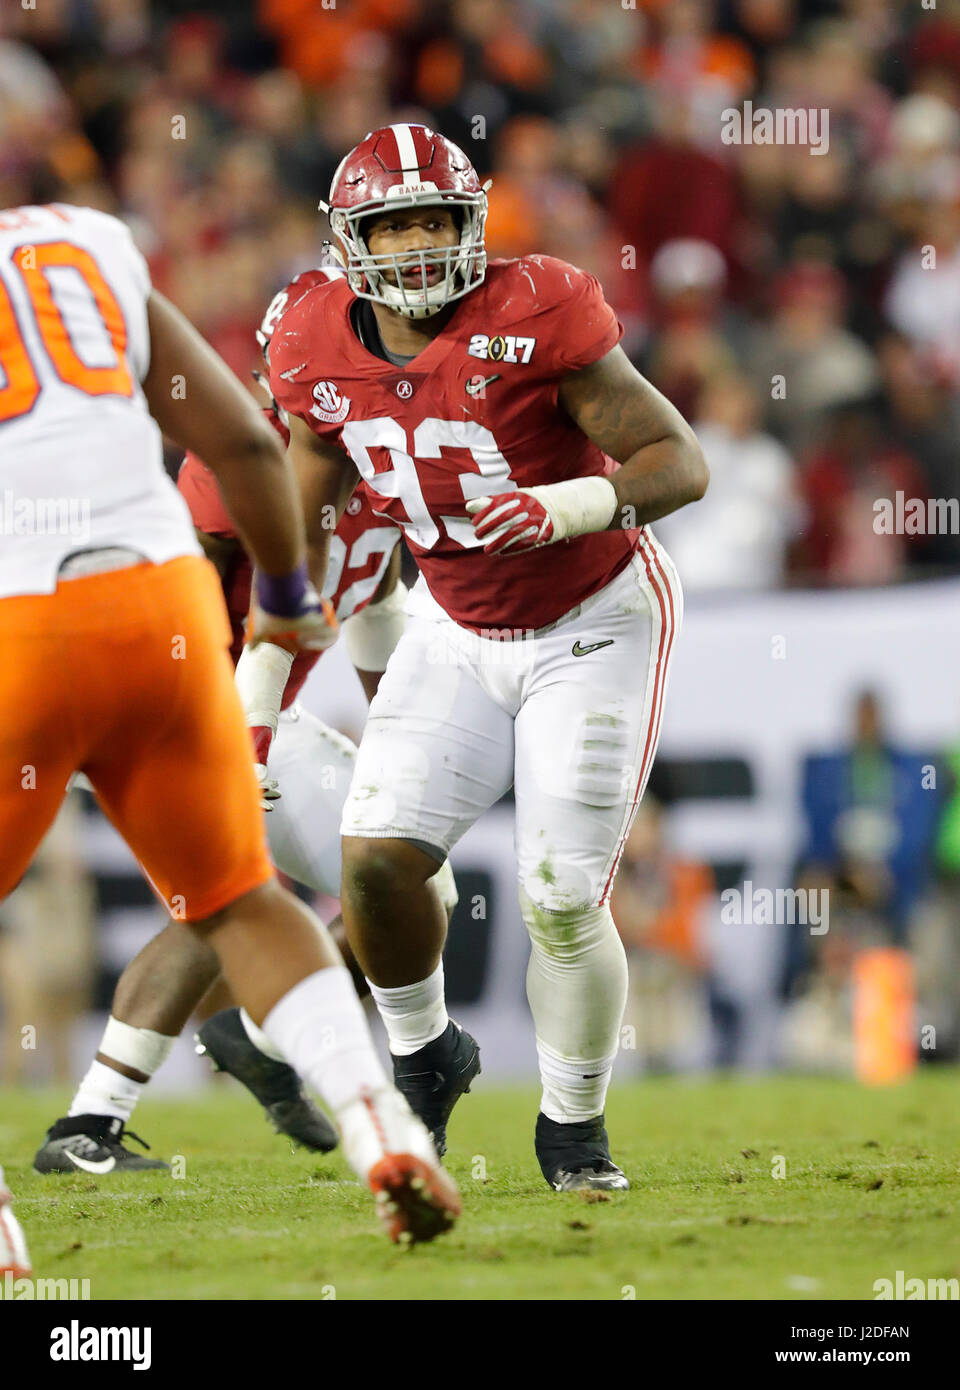 January, 9 2017 Tampa, FL.Alabama Crimson Tide defensive lineman (93) Jonathan Allen in action during the National Championship college football game between the Clemson Tigers, and Alabama Crimson Tide, on January 9, 2017. The Clemson Tigers beat the Alabama Crimson Tide 35-31 at Raymond James Stadium for the National Title, in Tampa, FL. (Absolute Complete Photographer & Company Credit: Jose/MarinMedia.org/Cal Sport Media) (Network Television please contact your Sales Representative for Television usage.) (Television news usage must over-burn ''MarinMedia'' on the top right corner of t Stock Photo